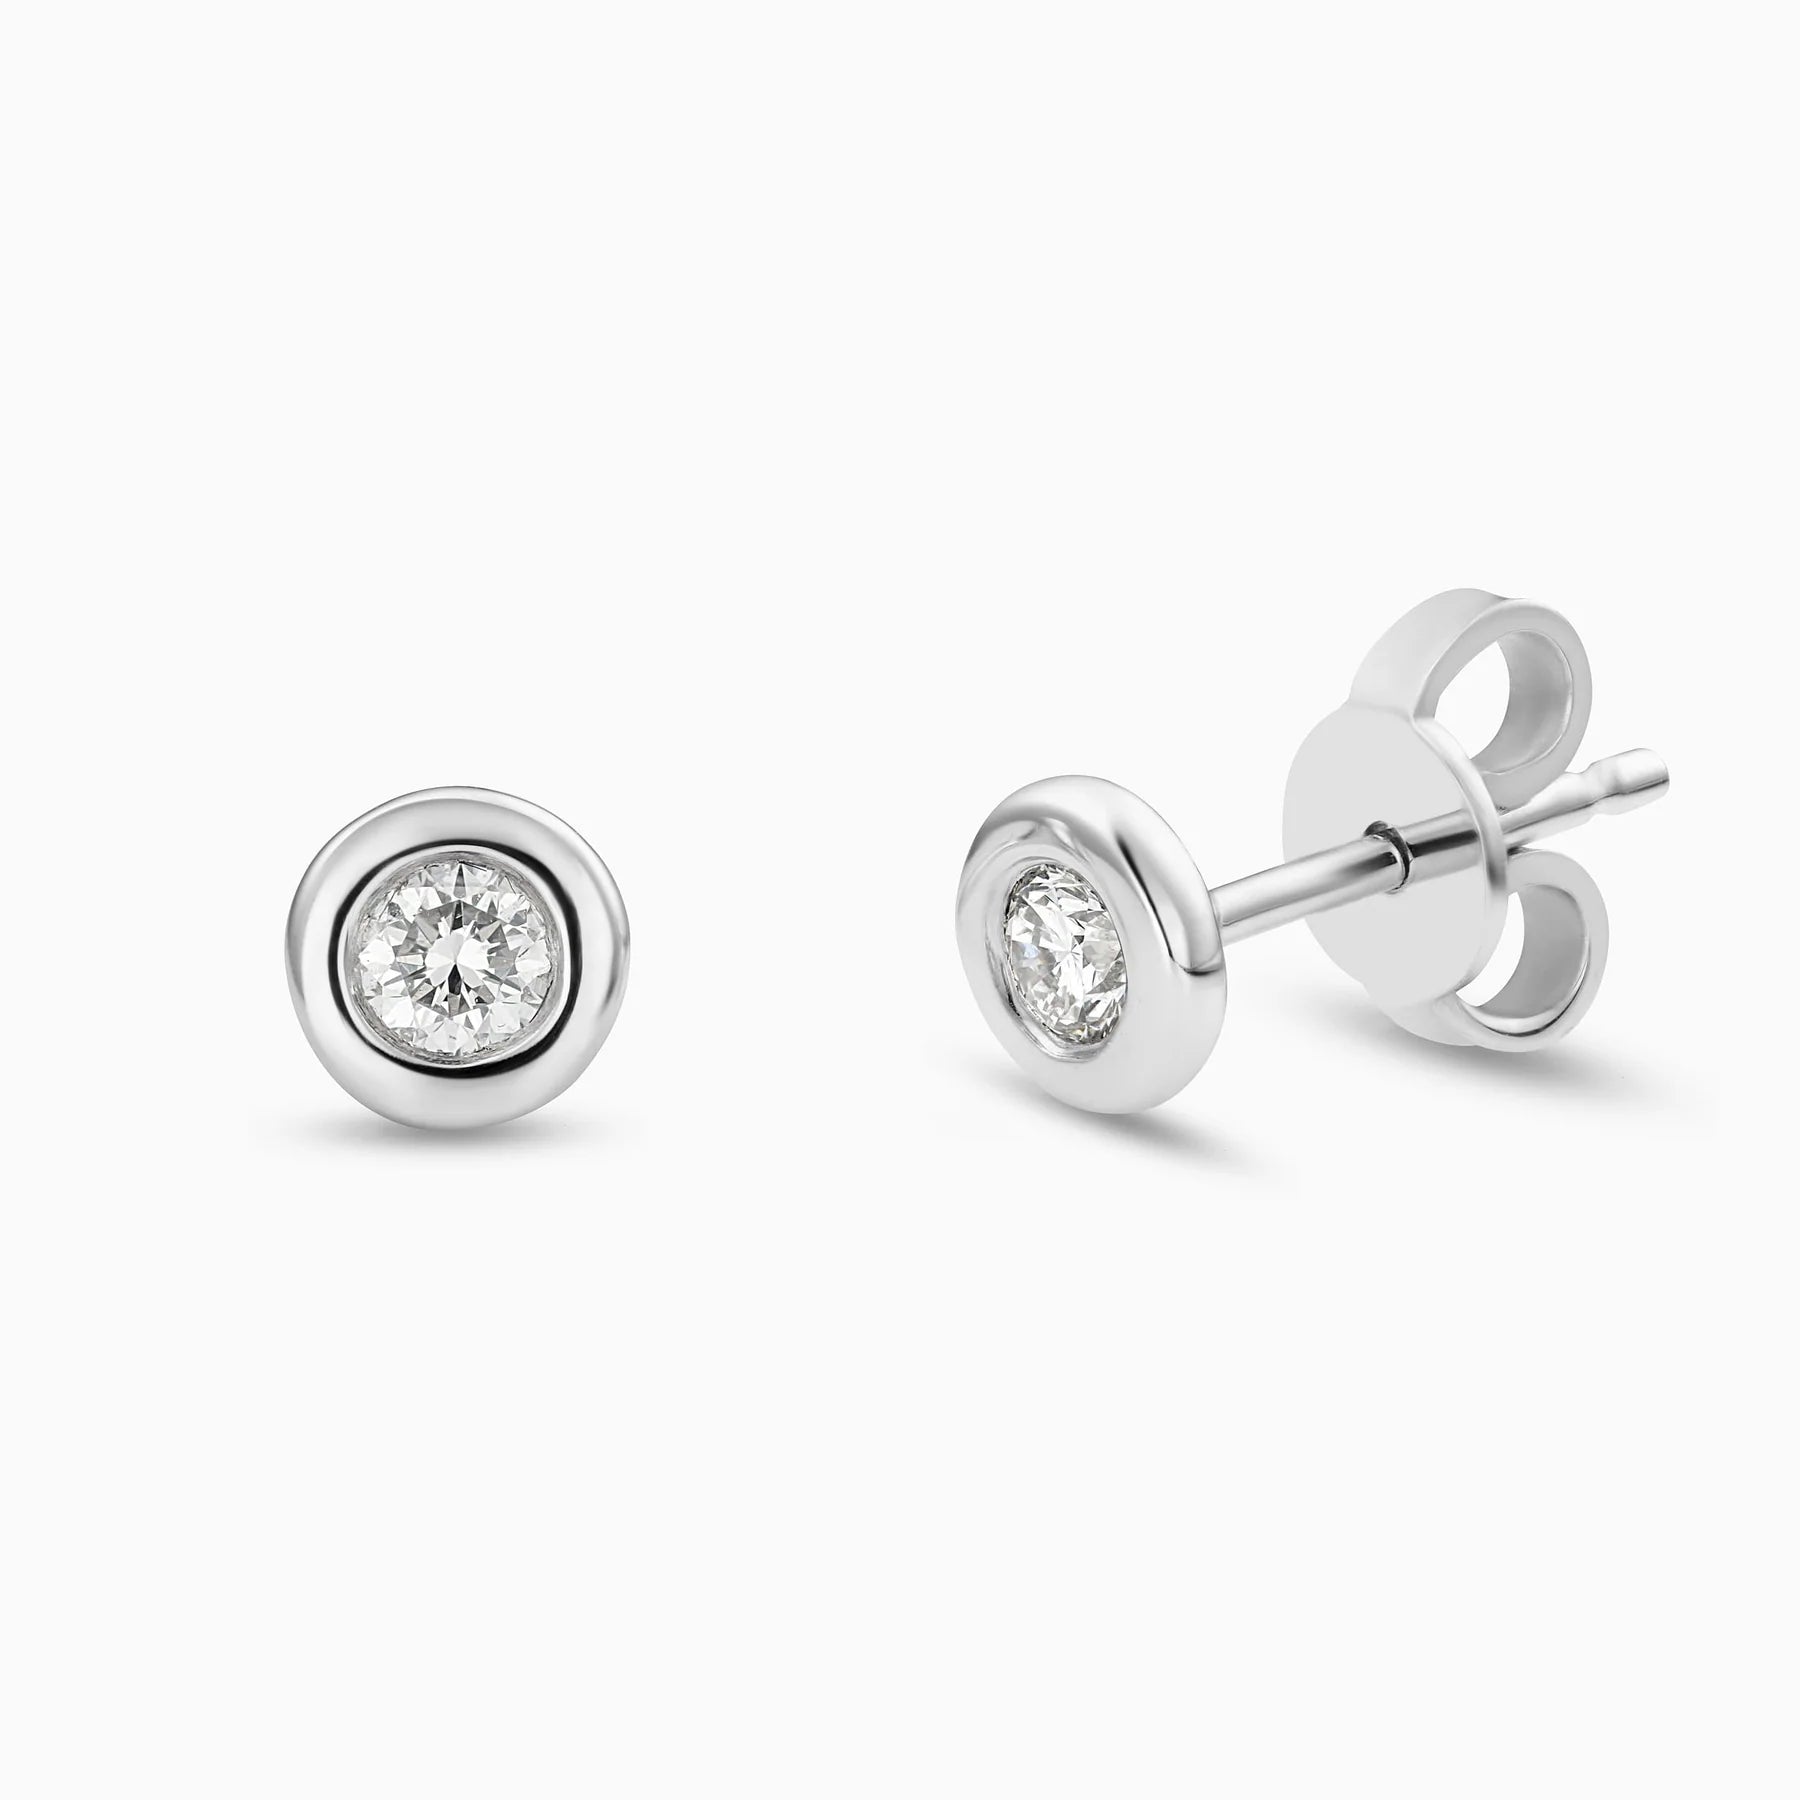 Essential everyday studs by Caye Joaillier available at Falena Fine Jewelry in White Gold. Option of .2 or .5 ct